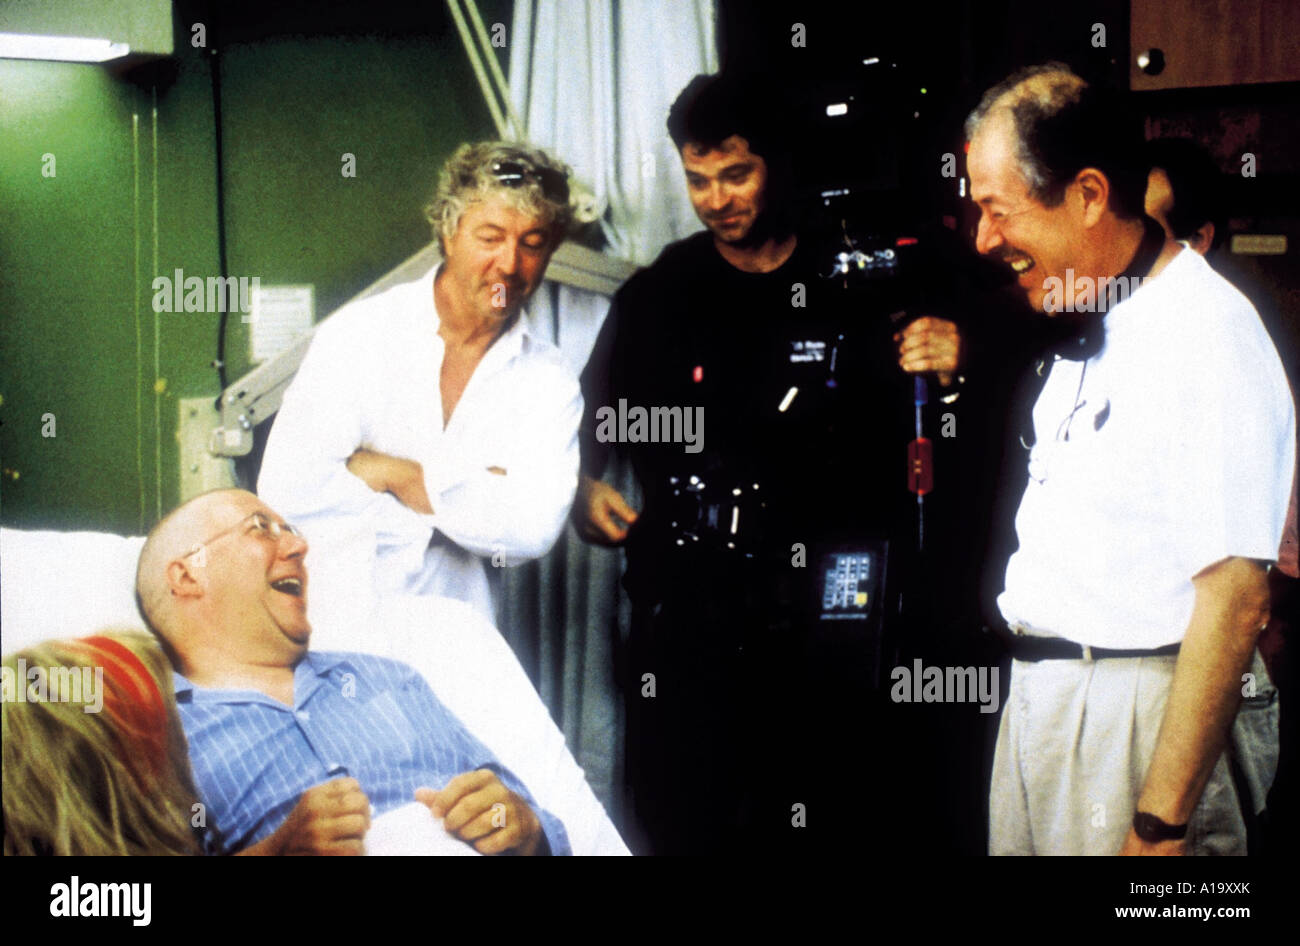 Les Invasions barbares Year 2003 Director Denys Arcand Shooting picture Stock Photo